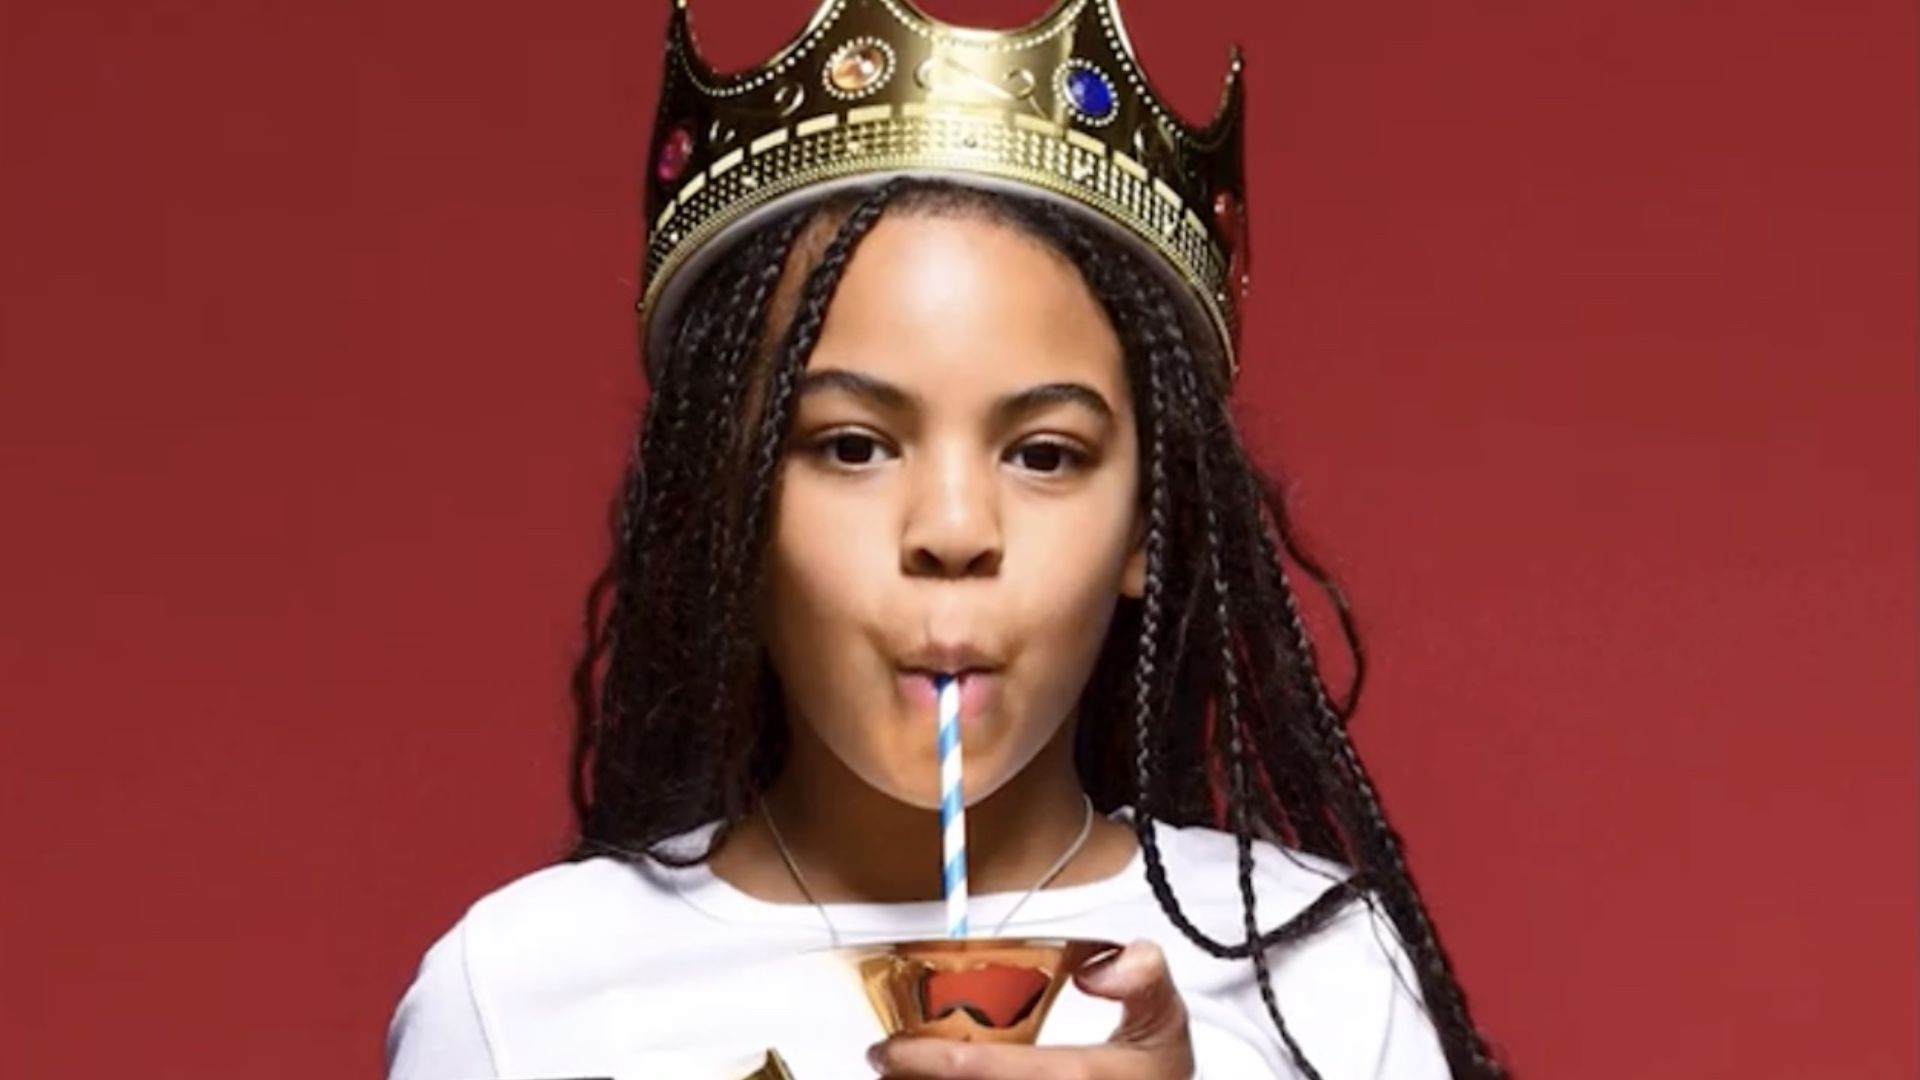 Blue Ivy Carter With A Crown On Her Head Sipping From A Straw